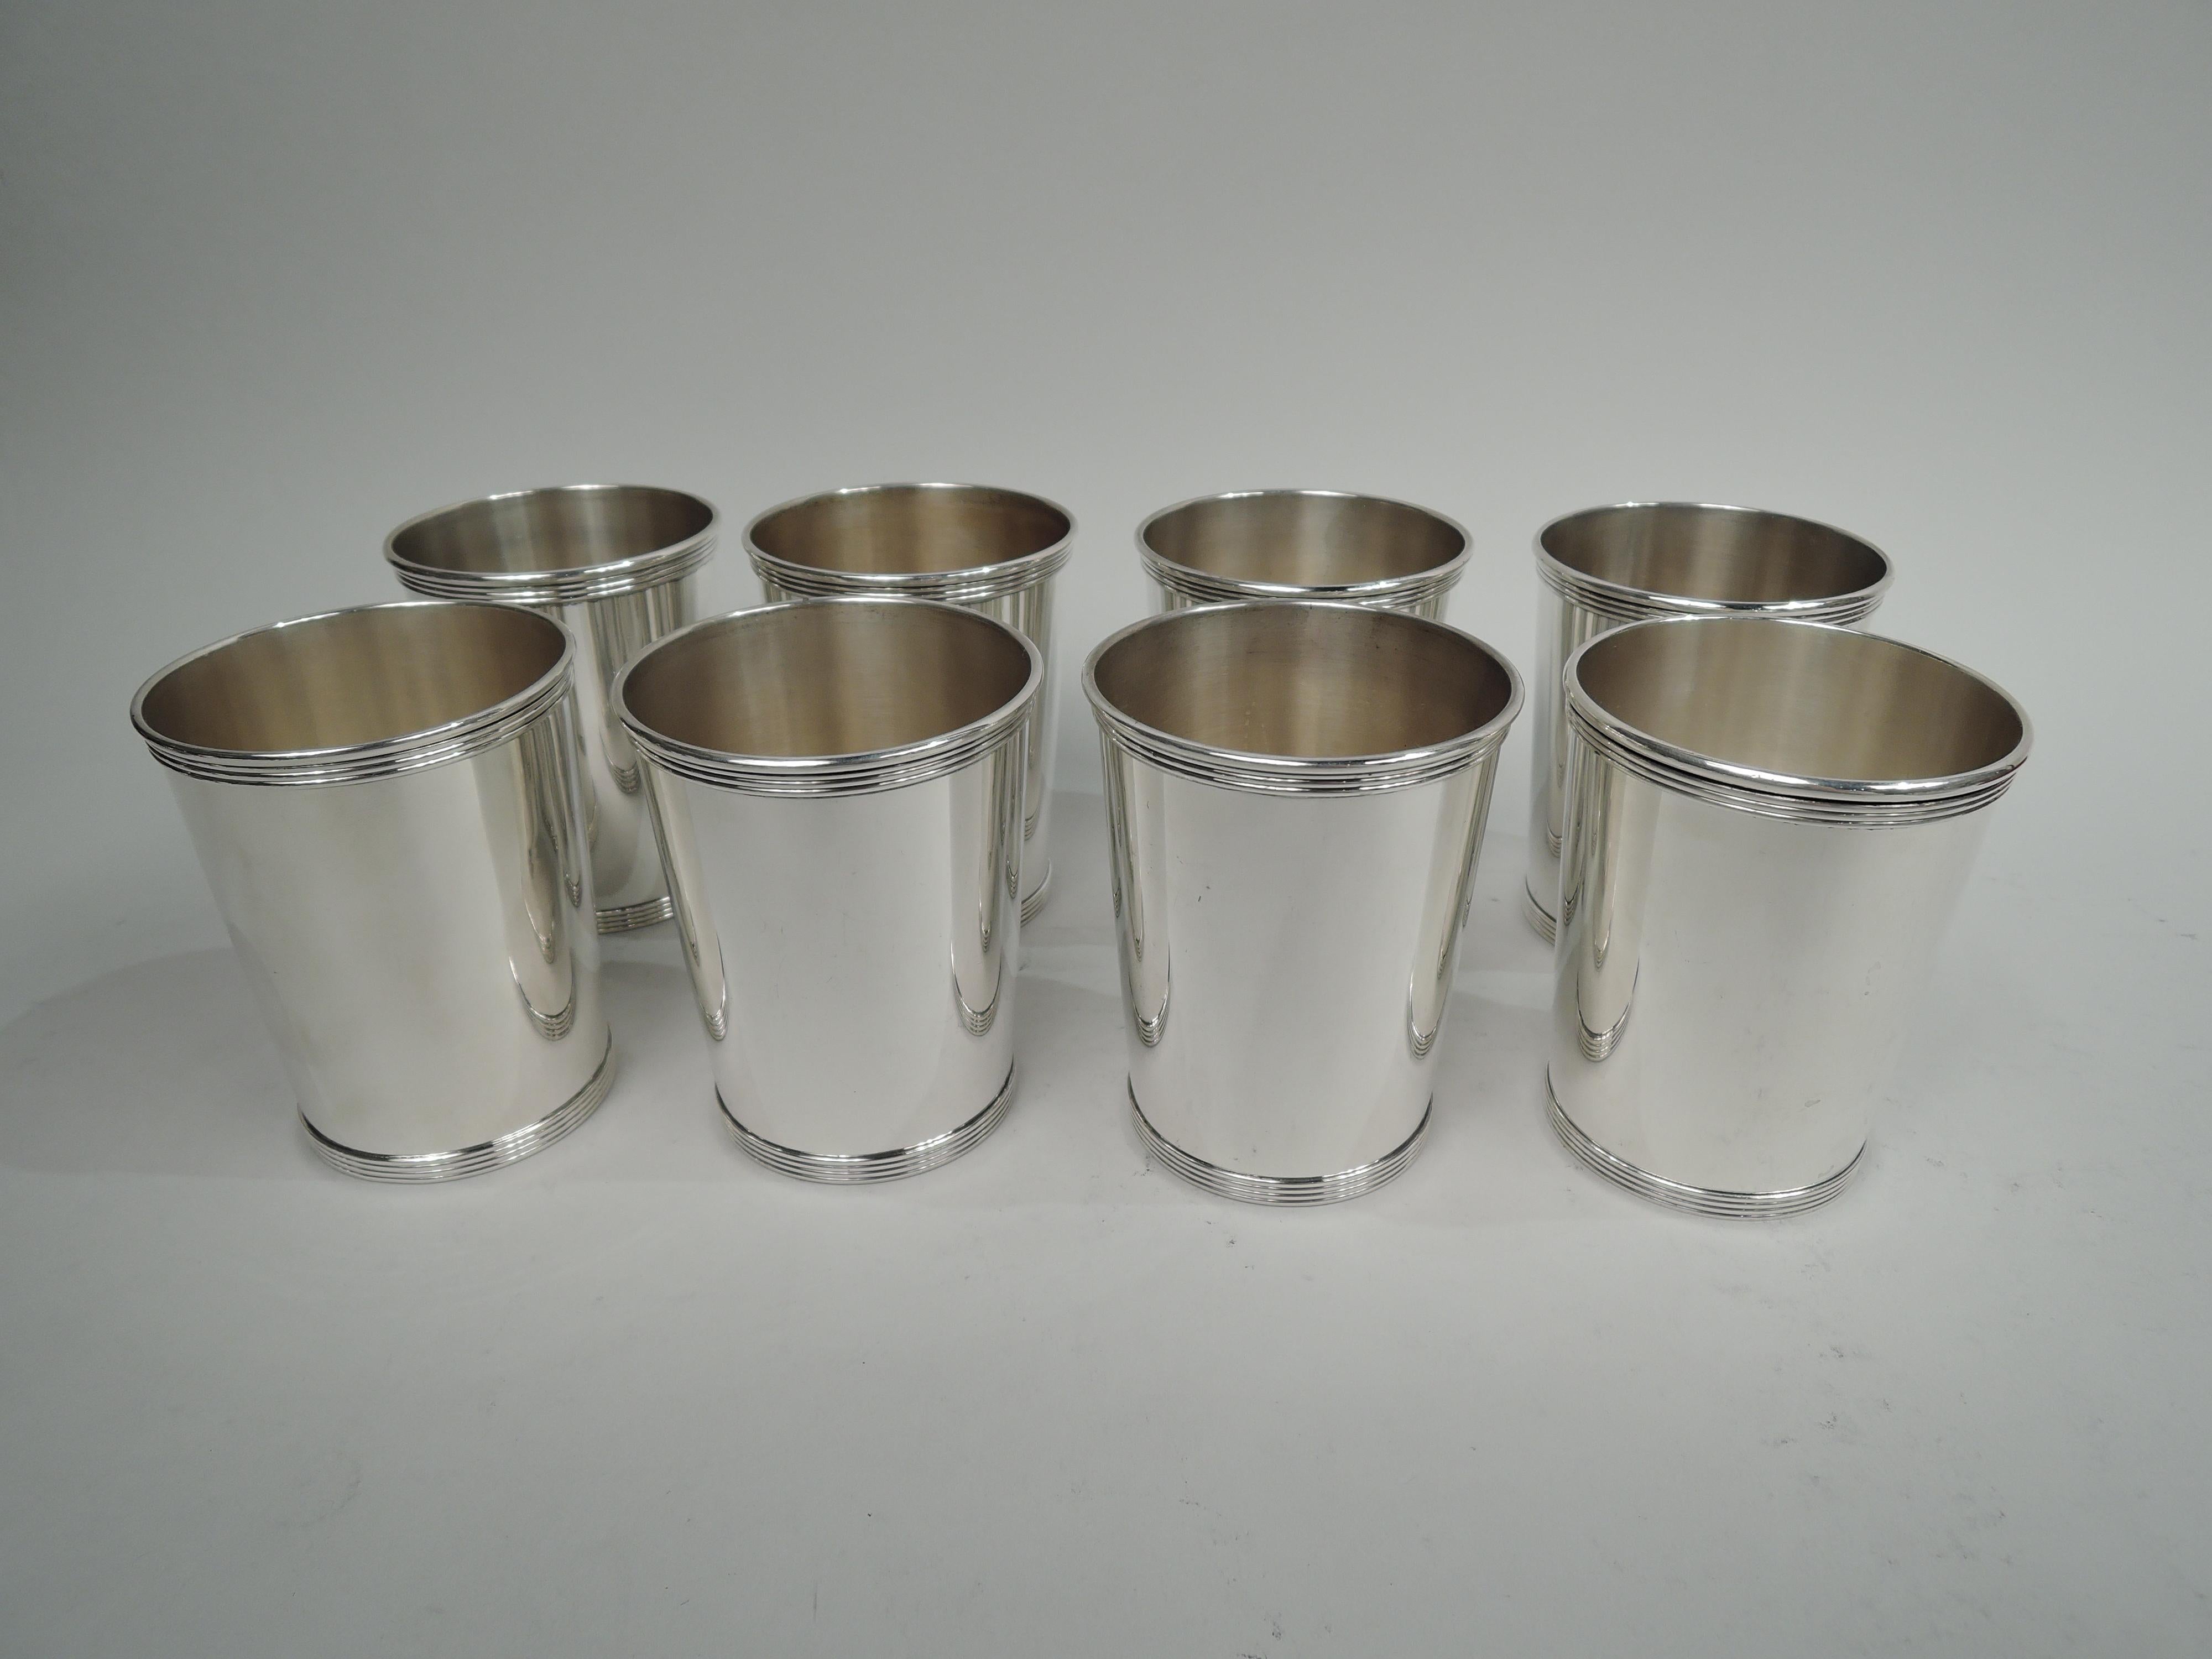 Set of 8 traditional sterling silver mint juleps. Made by Alvin in Providence. Each: Straight and tapering sides and reeded rim and foot. Fully marked including maker’s stamp and no. S251. Total weight: 29.8 troy ounces.